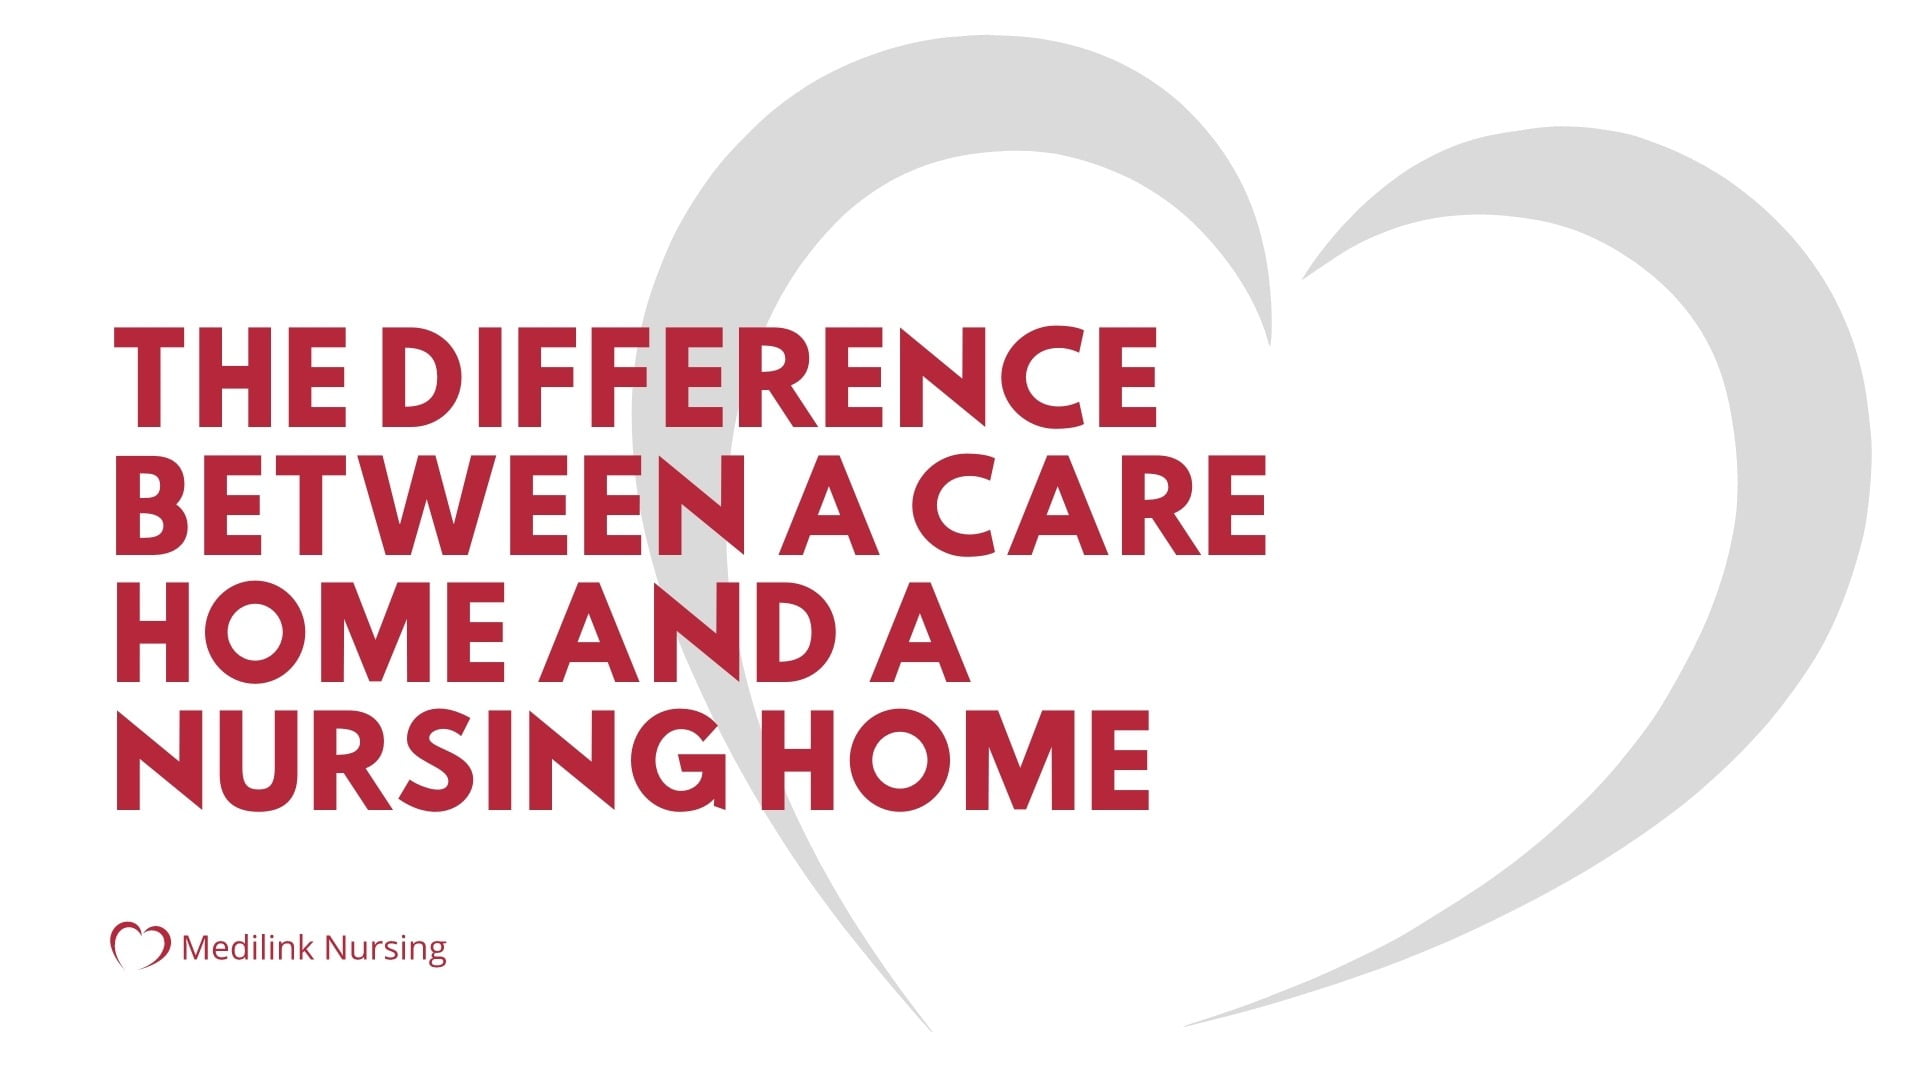 The Difference Between a Care Home and a Nursing Home